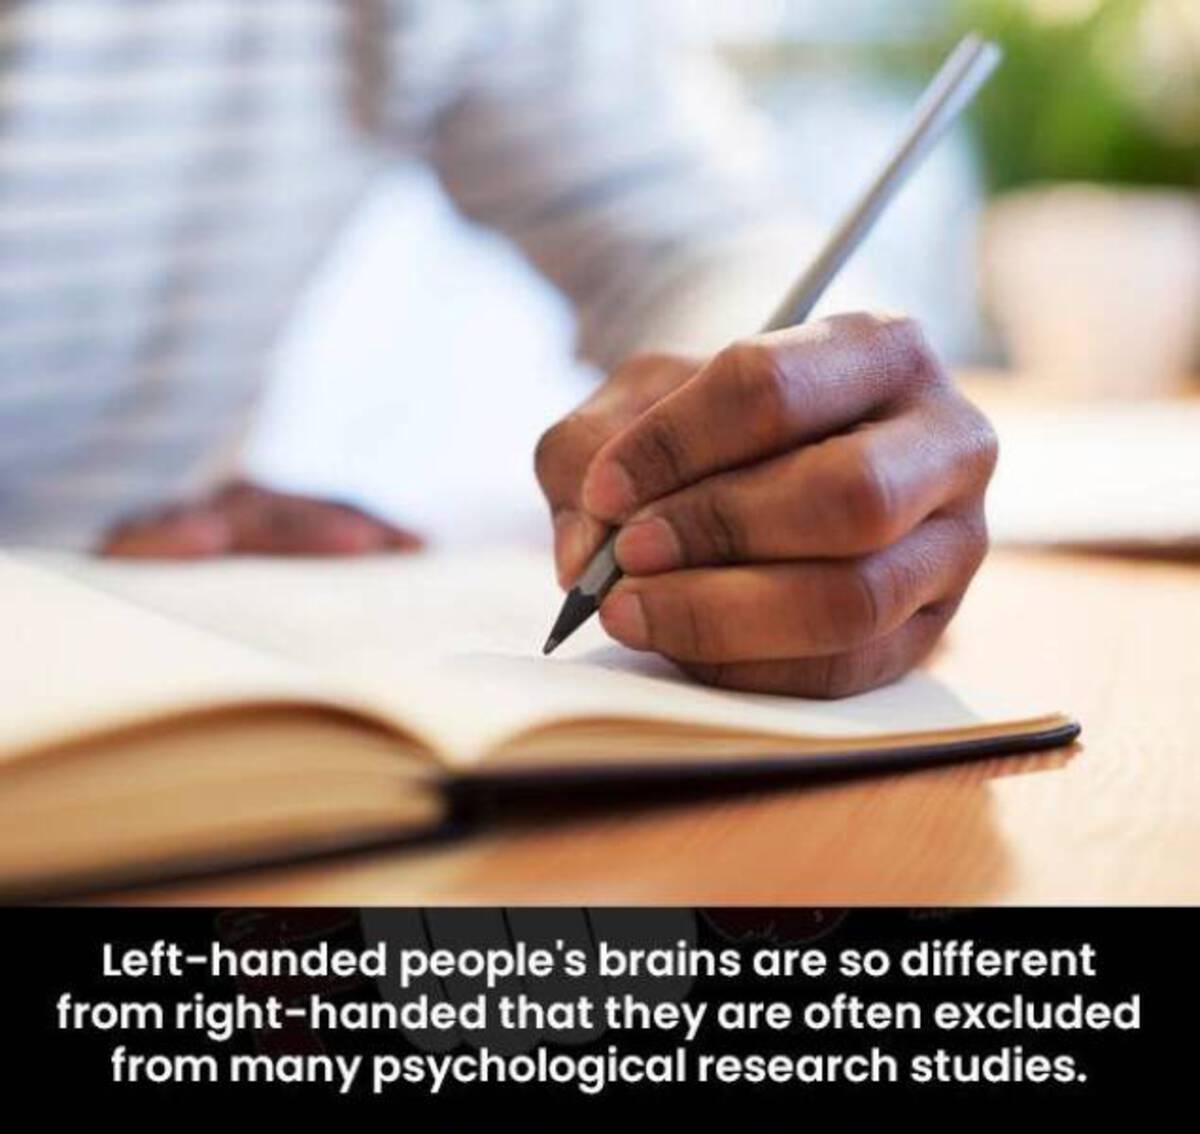 left handed people - Lefthanded people's brains are so different from righthanded that they are often excluded from many psychological research studies.